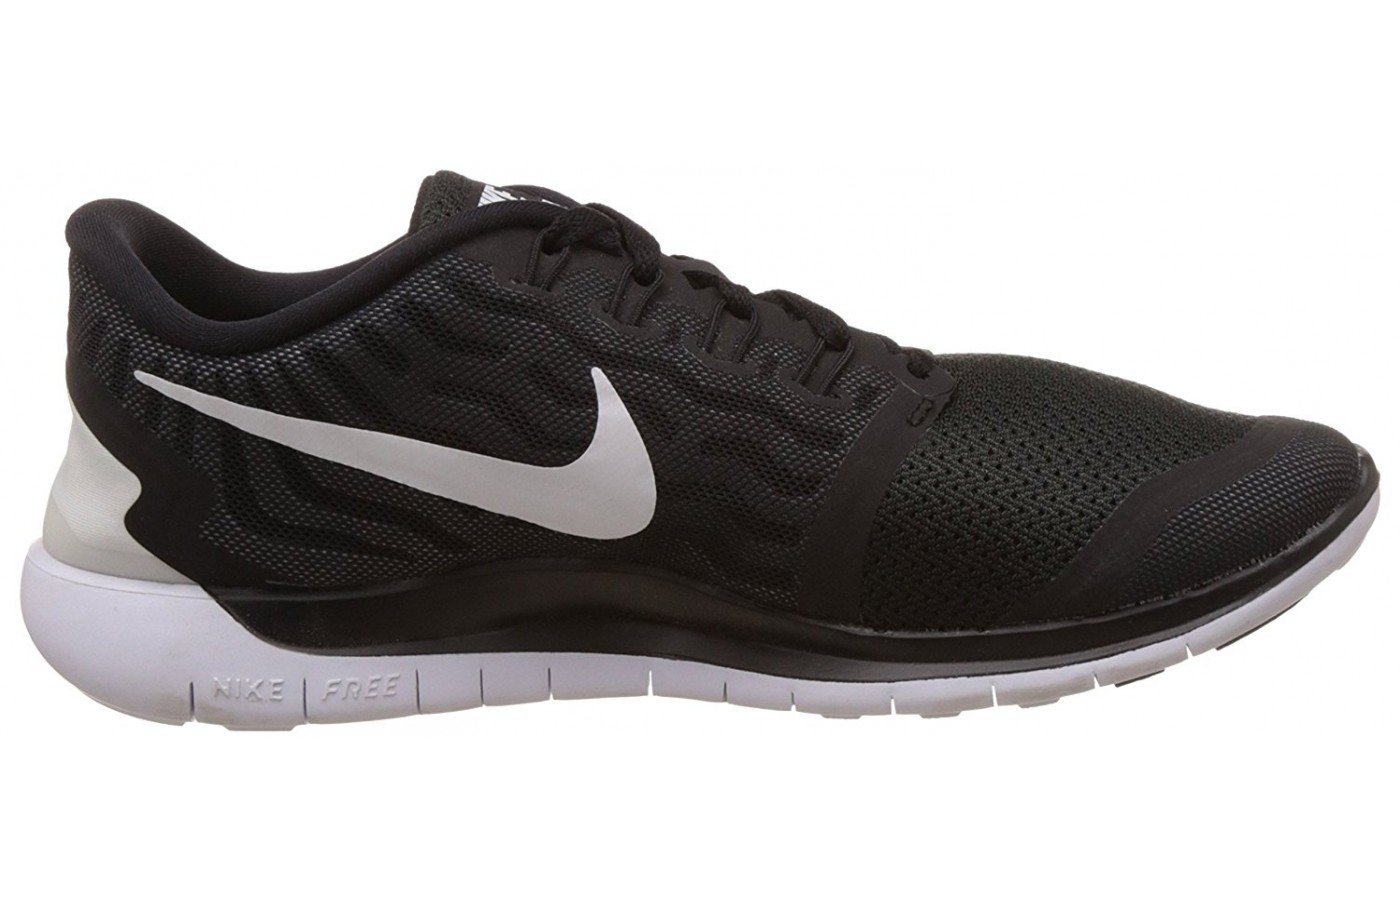 right to left view of the Nike Free 5.0